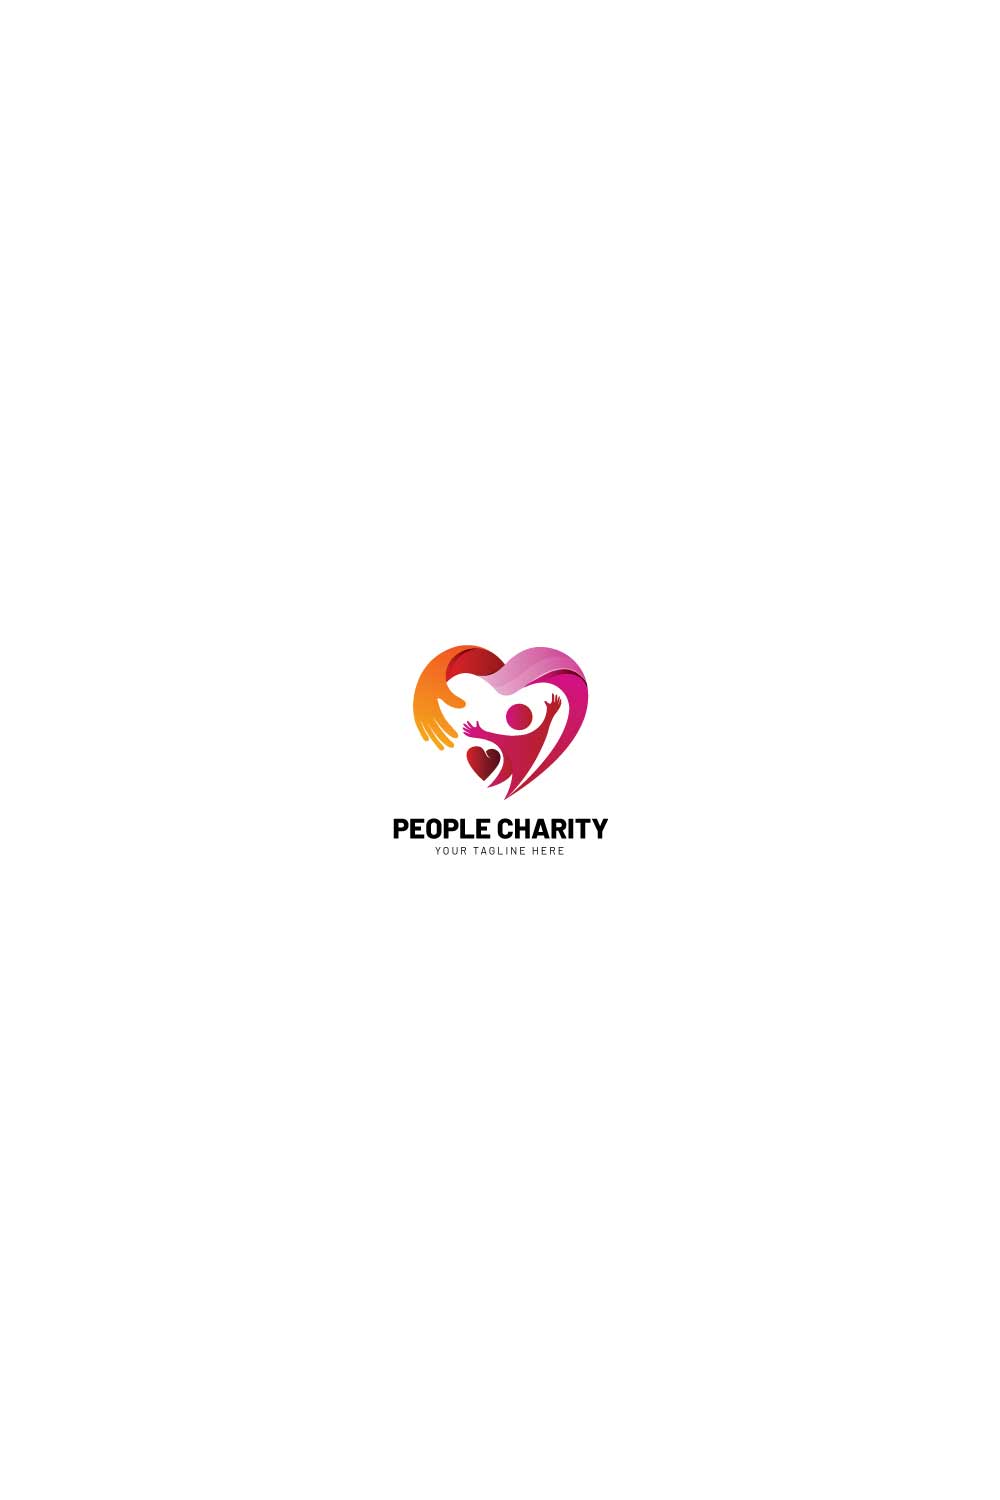 Heart logo and people design, Charity logo pinterest preview image.